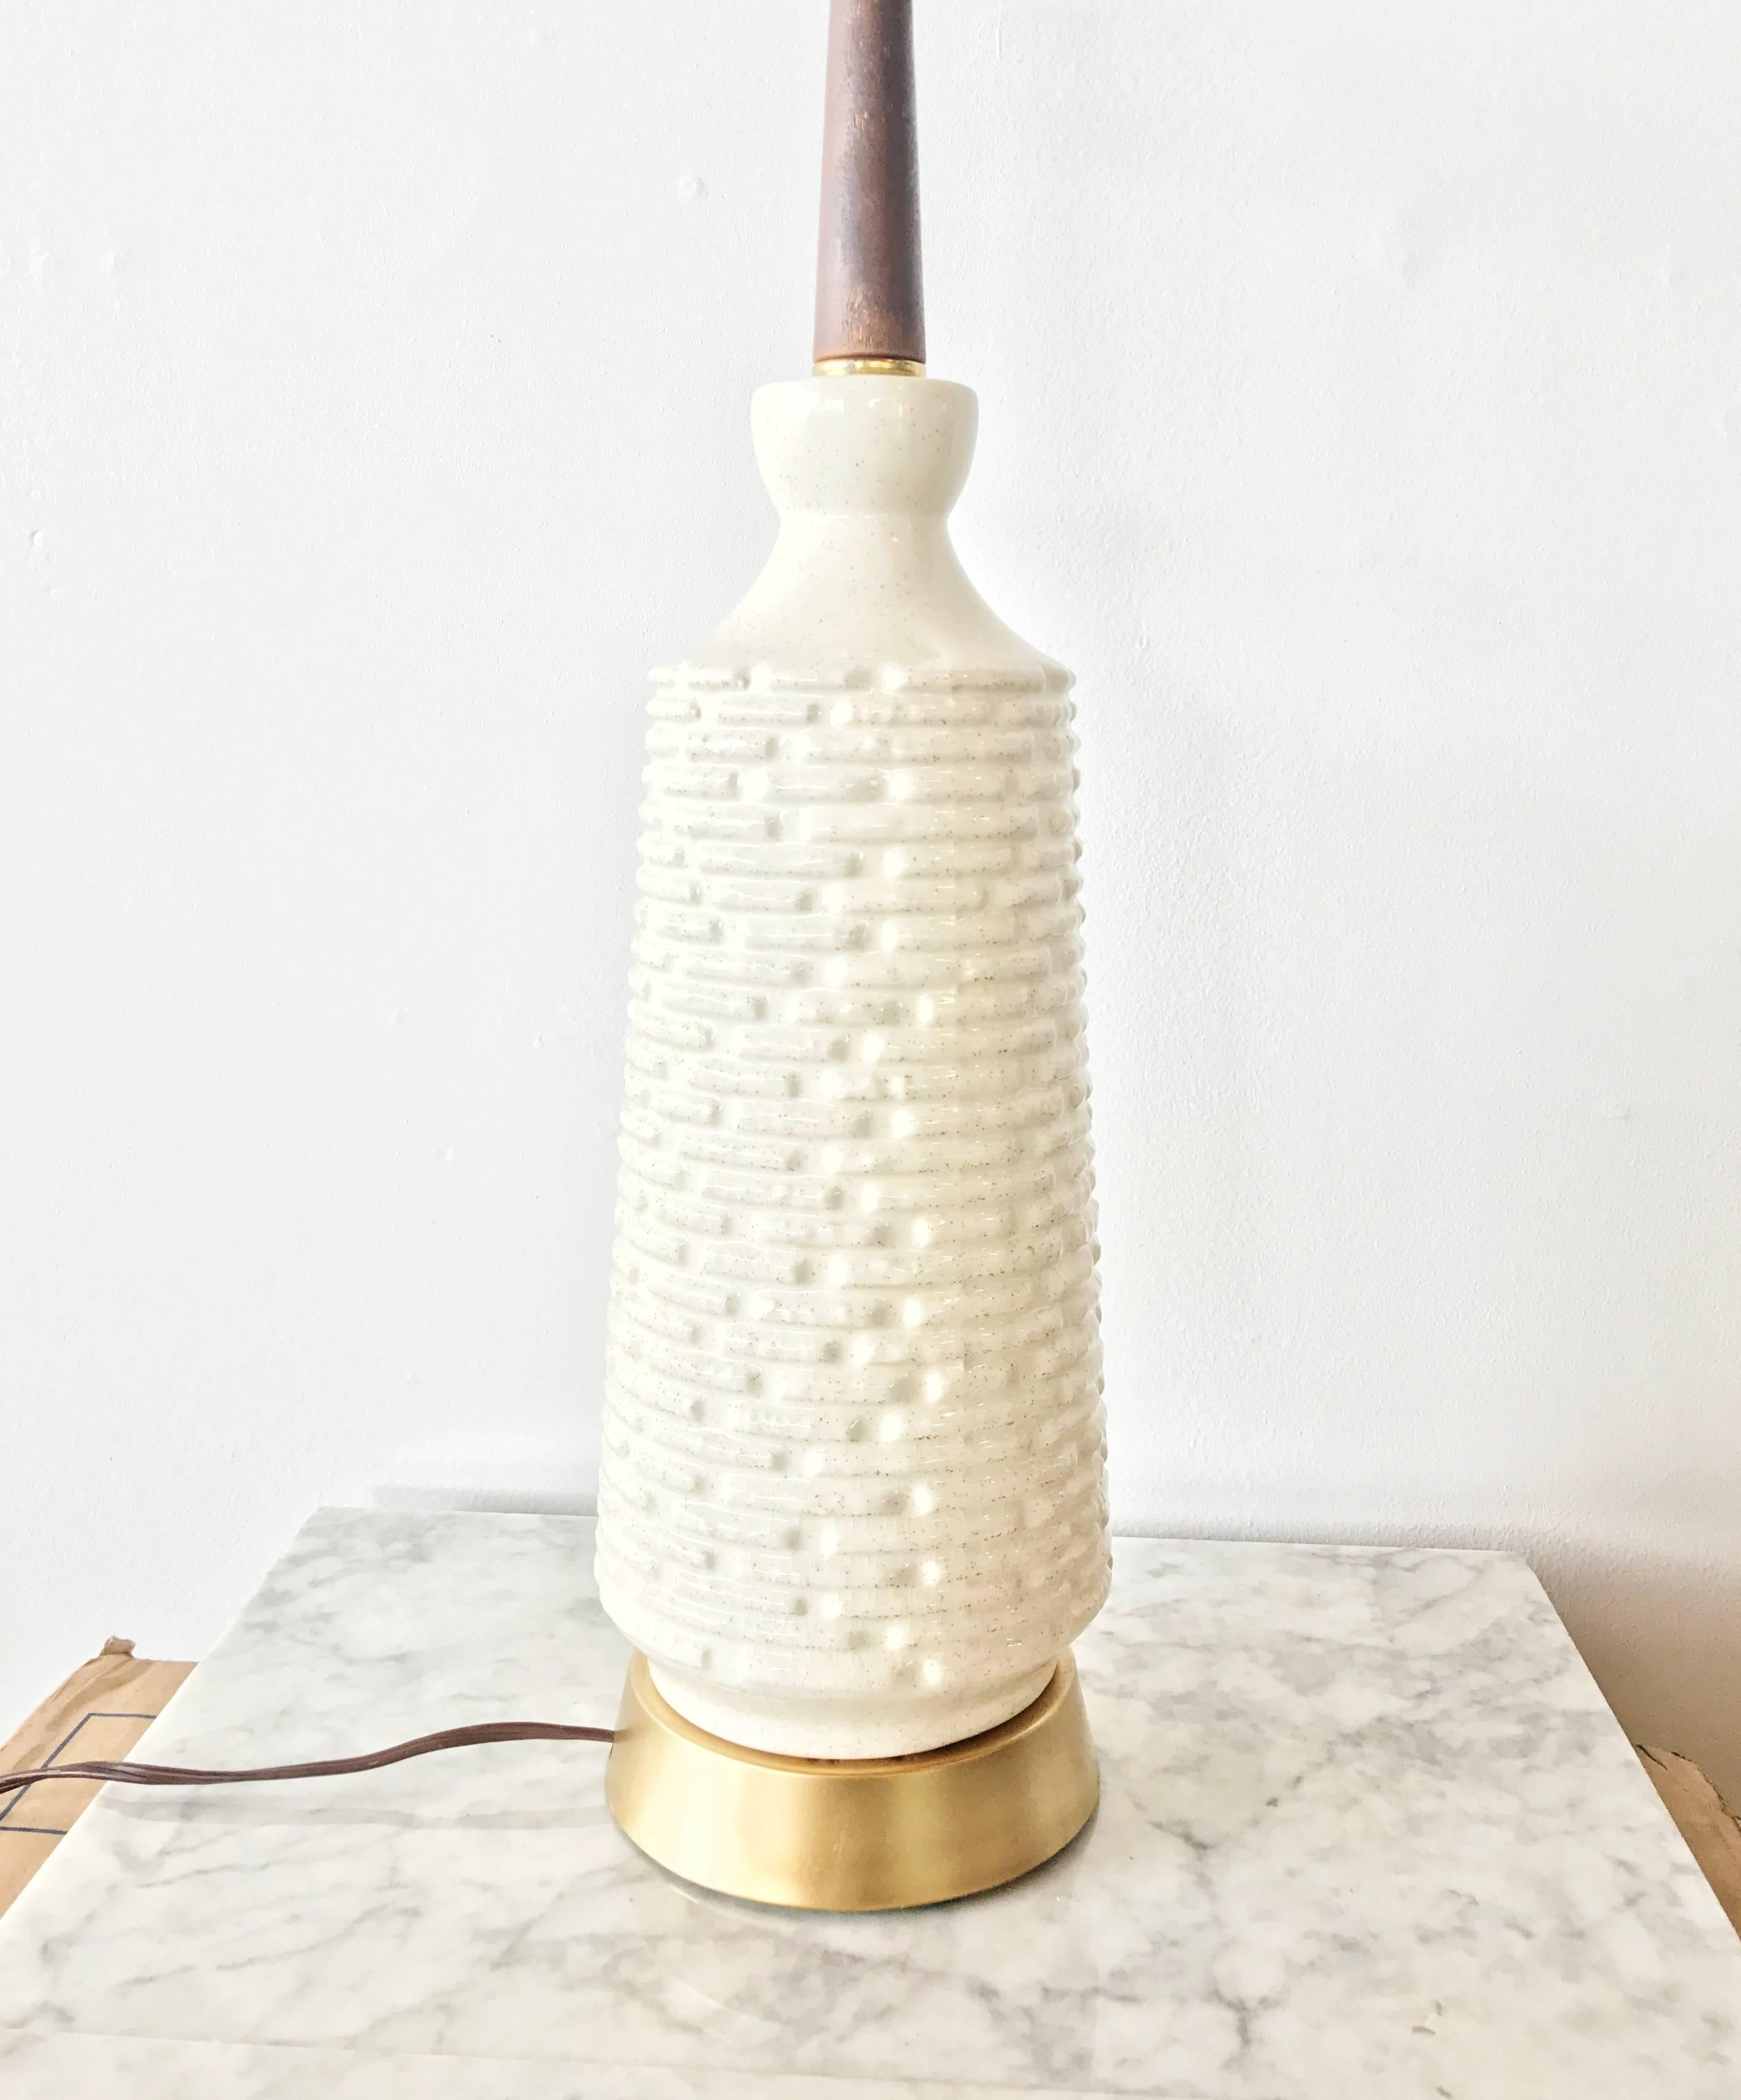 Wonderfully textured ceramic lamp, circa 1960. Featuring a subtly moulded geometric grid pattern that progresses across the body of the lamp which is affixed to a gold toned base with a wooden neck. 

This table lamp can be used in a dining room,